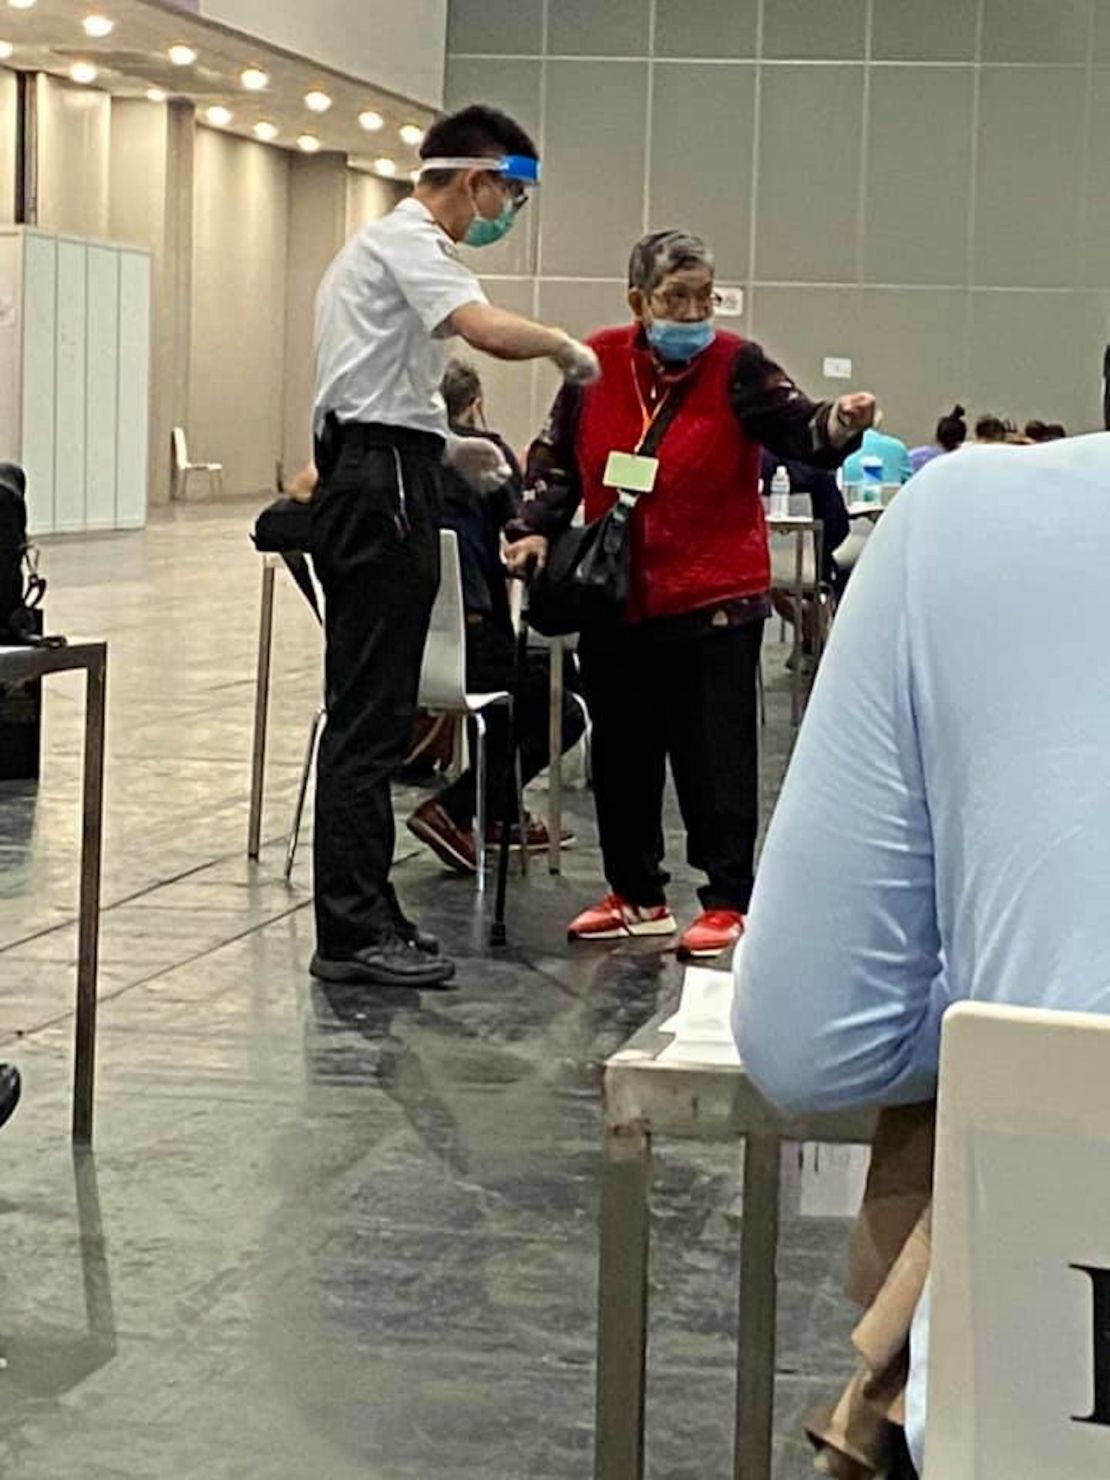 Anna Gong is seen waiting at the quarantine center in this photograph from Sharon Hawkins Leung, one of the group members who updated Jameson Gong on his mother's status. Leung joked her Cantonese isn't very good but it sounded like Anna Gong was giving the guard a piece of her mind. 